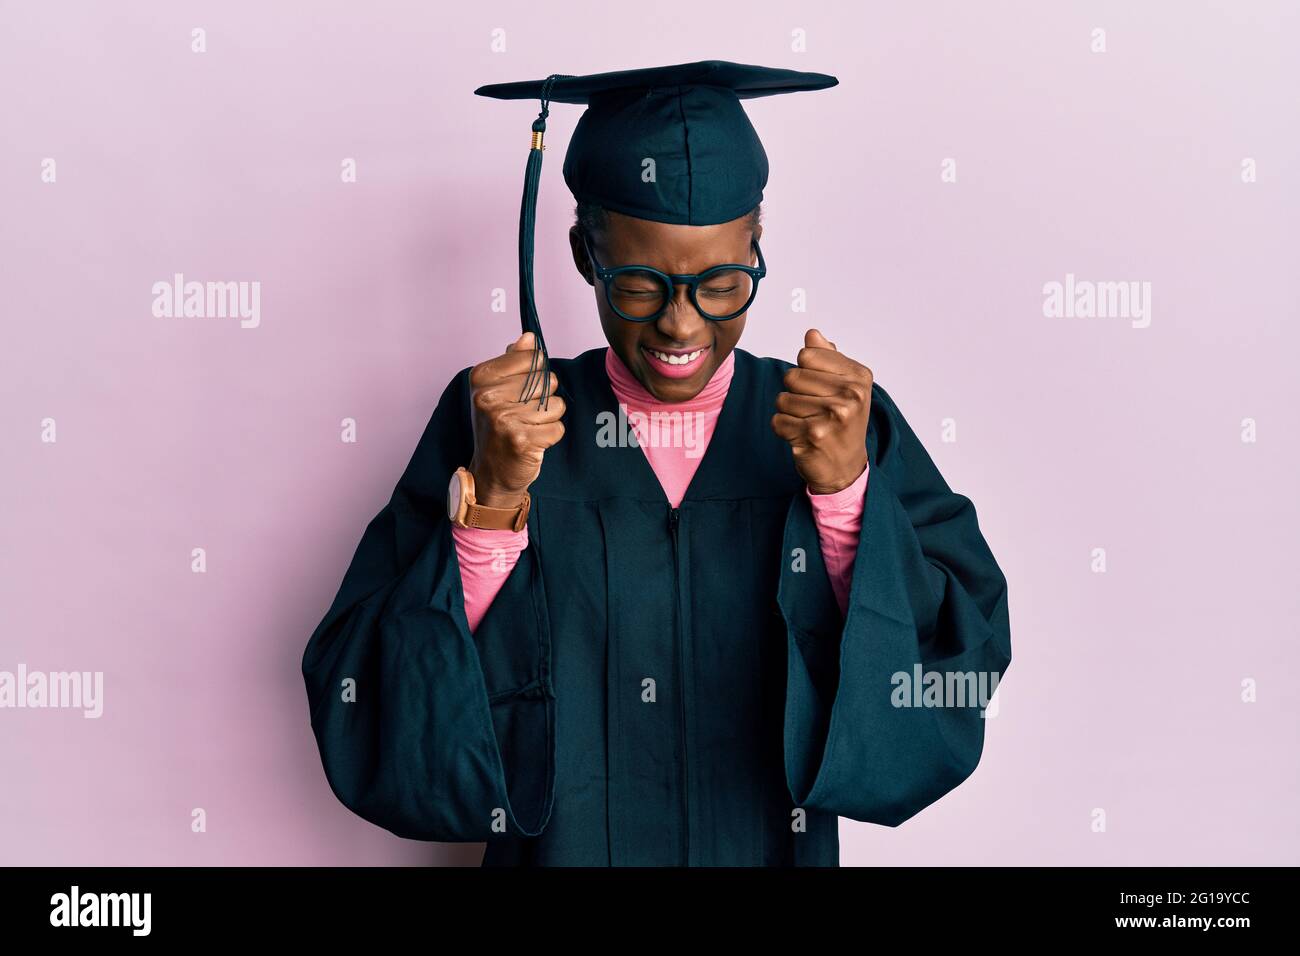 Young african american girl wearing graduation cap and ceremony robe excited for success with arms raised and eyes closed celebrating victory smiling. Stock Photo